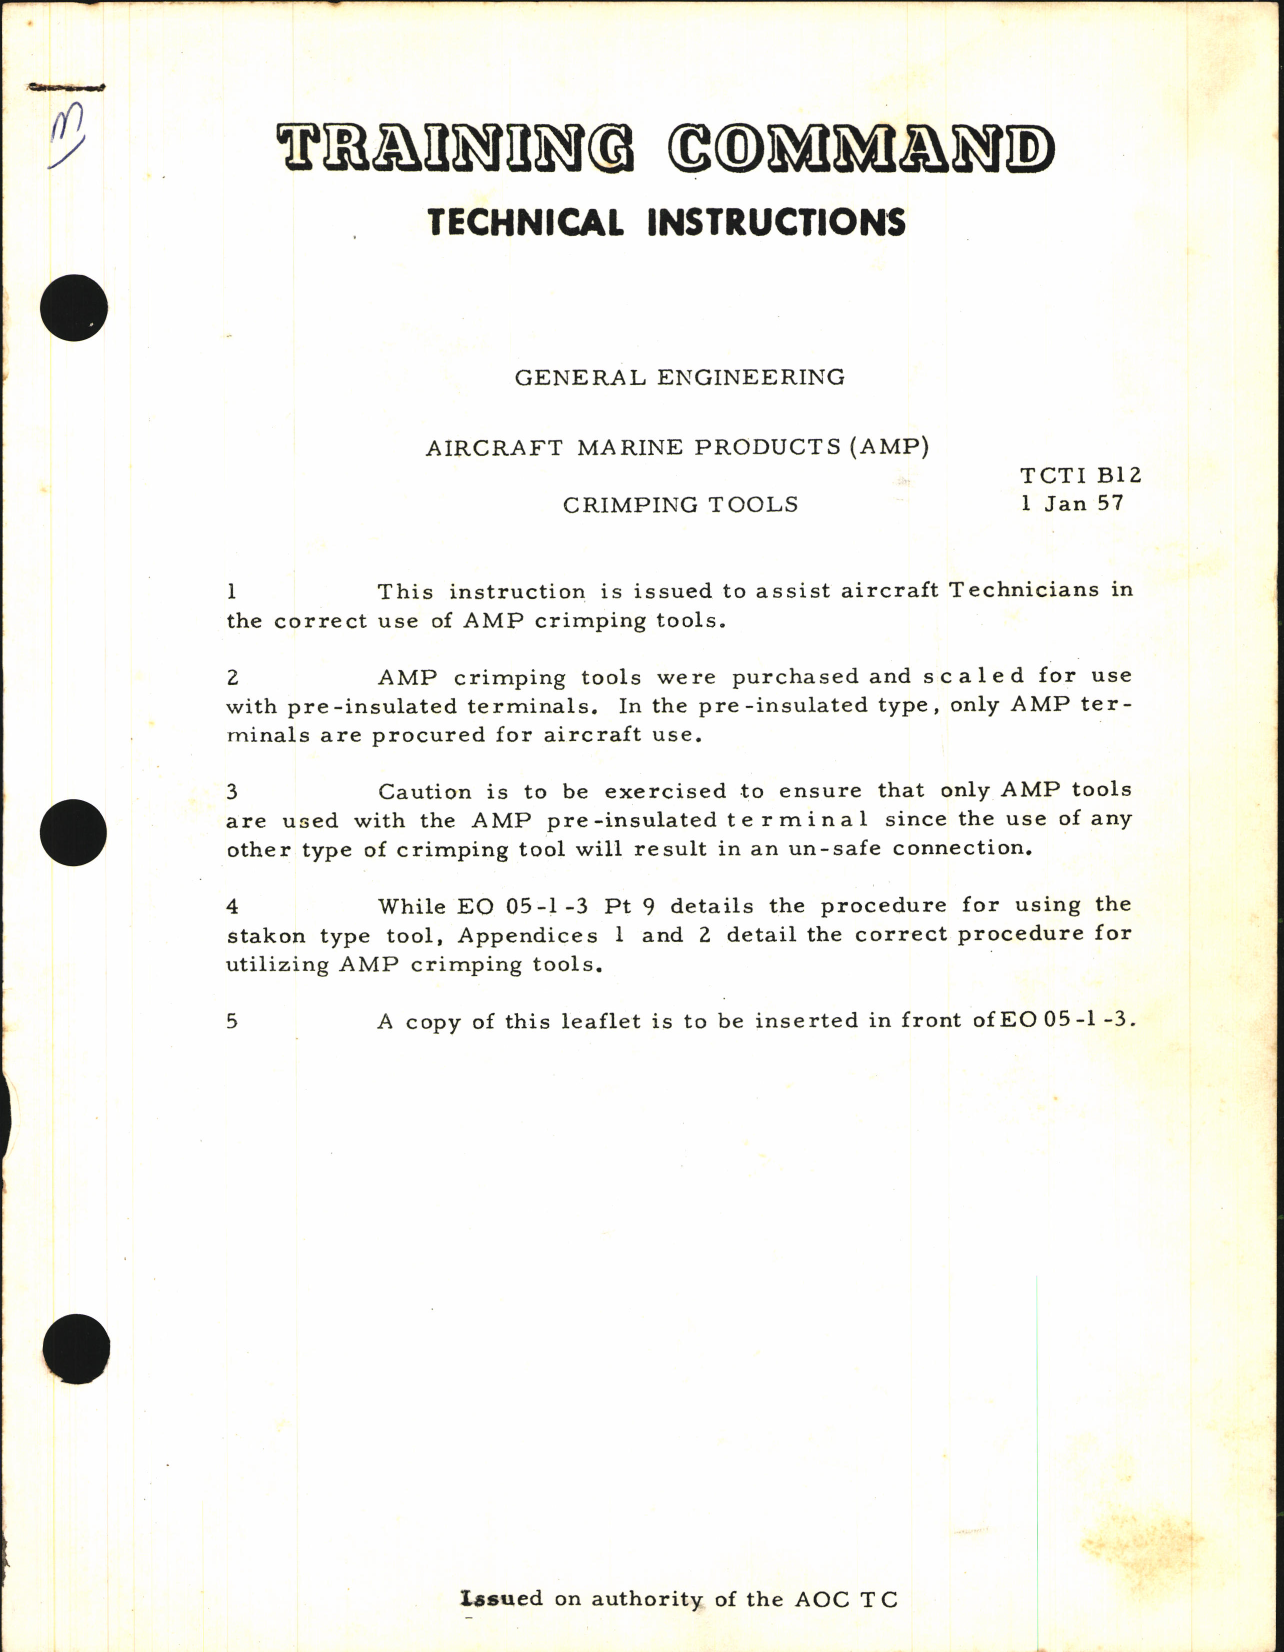 Sample page 1 from AirCorps Library document: Training Command Technical Instructions for Aircraft Marine Products (AMP) Crimping Tools